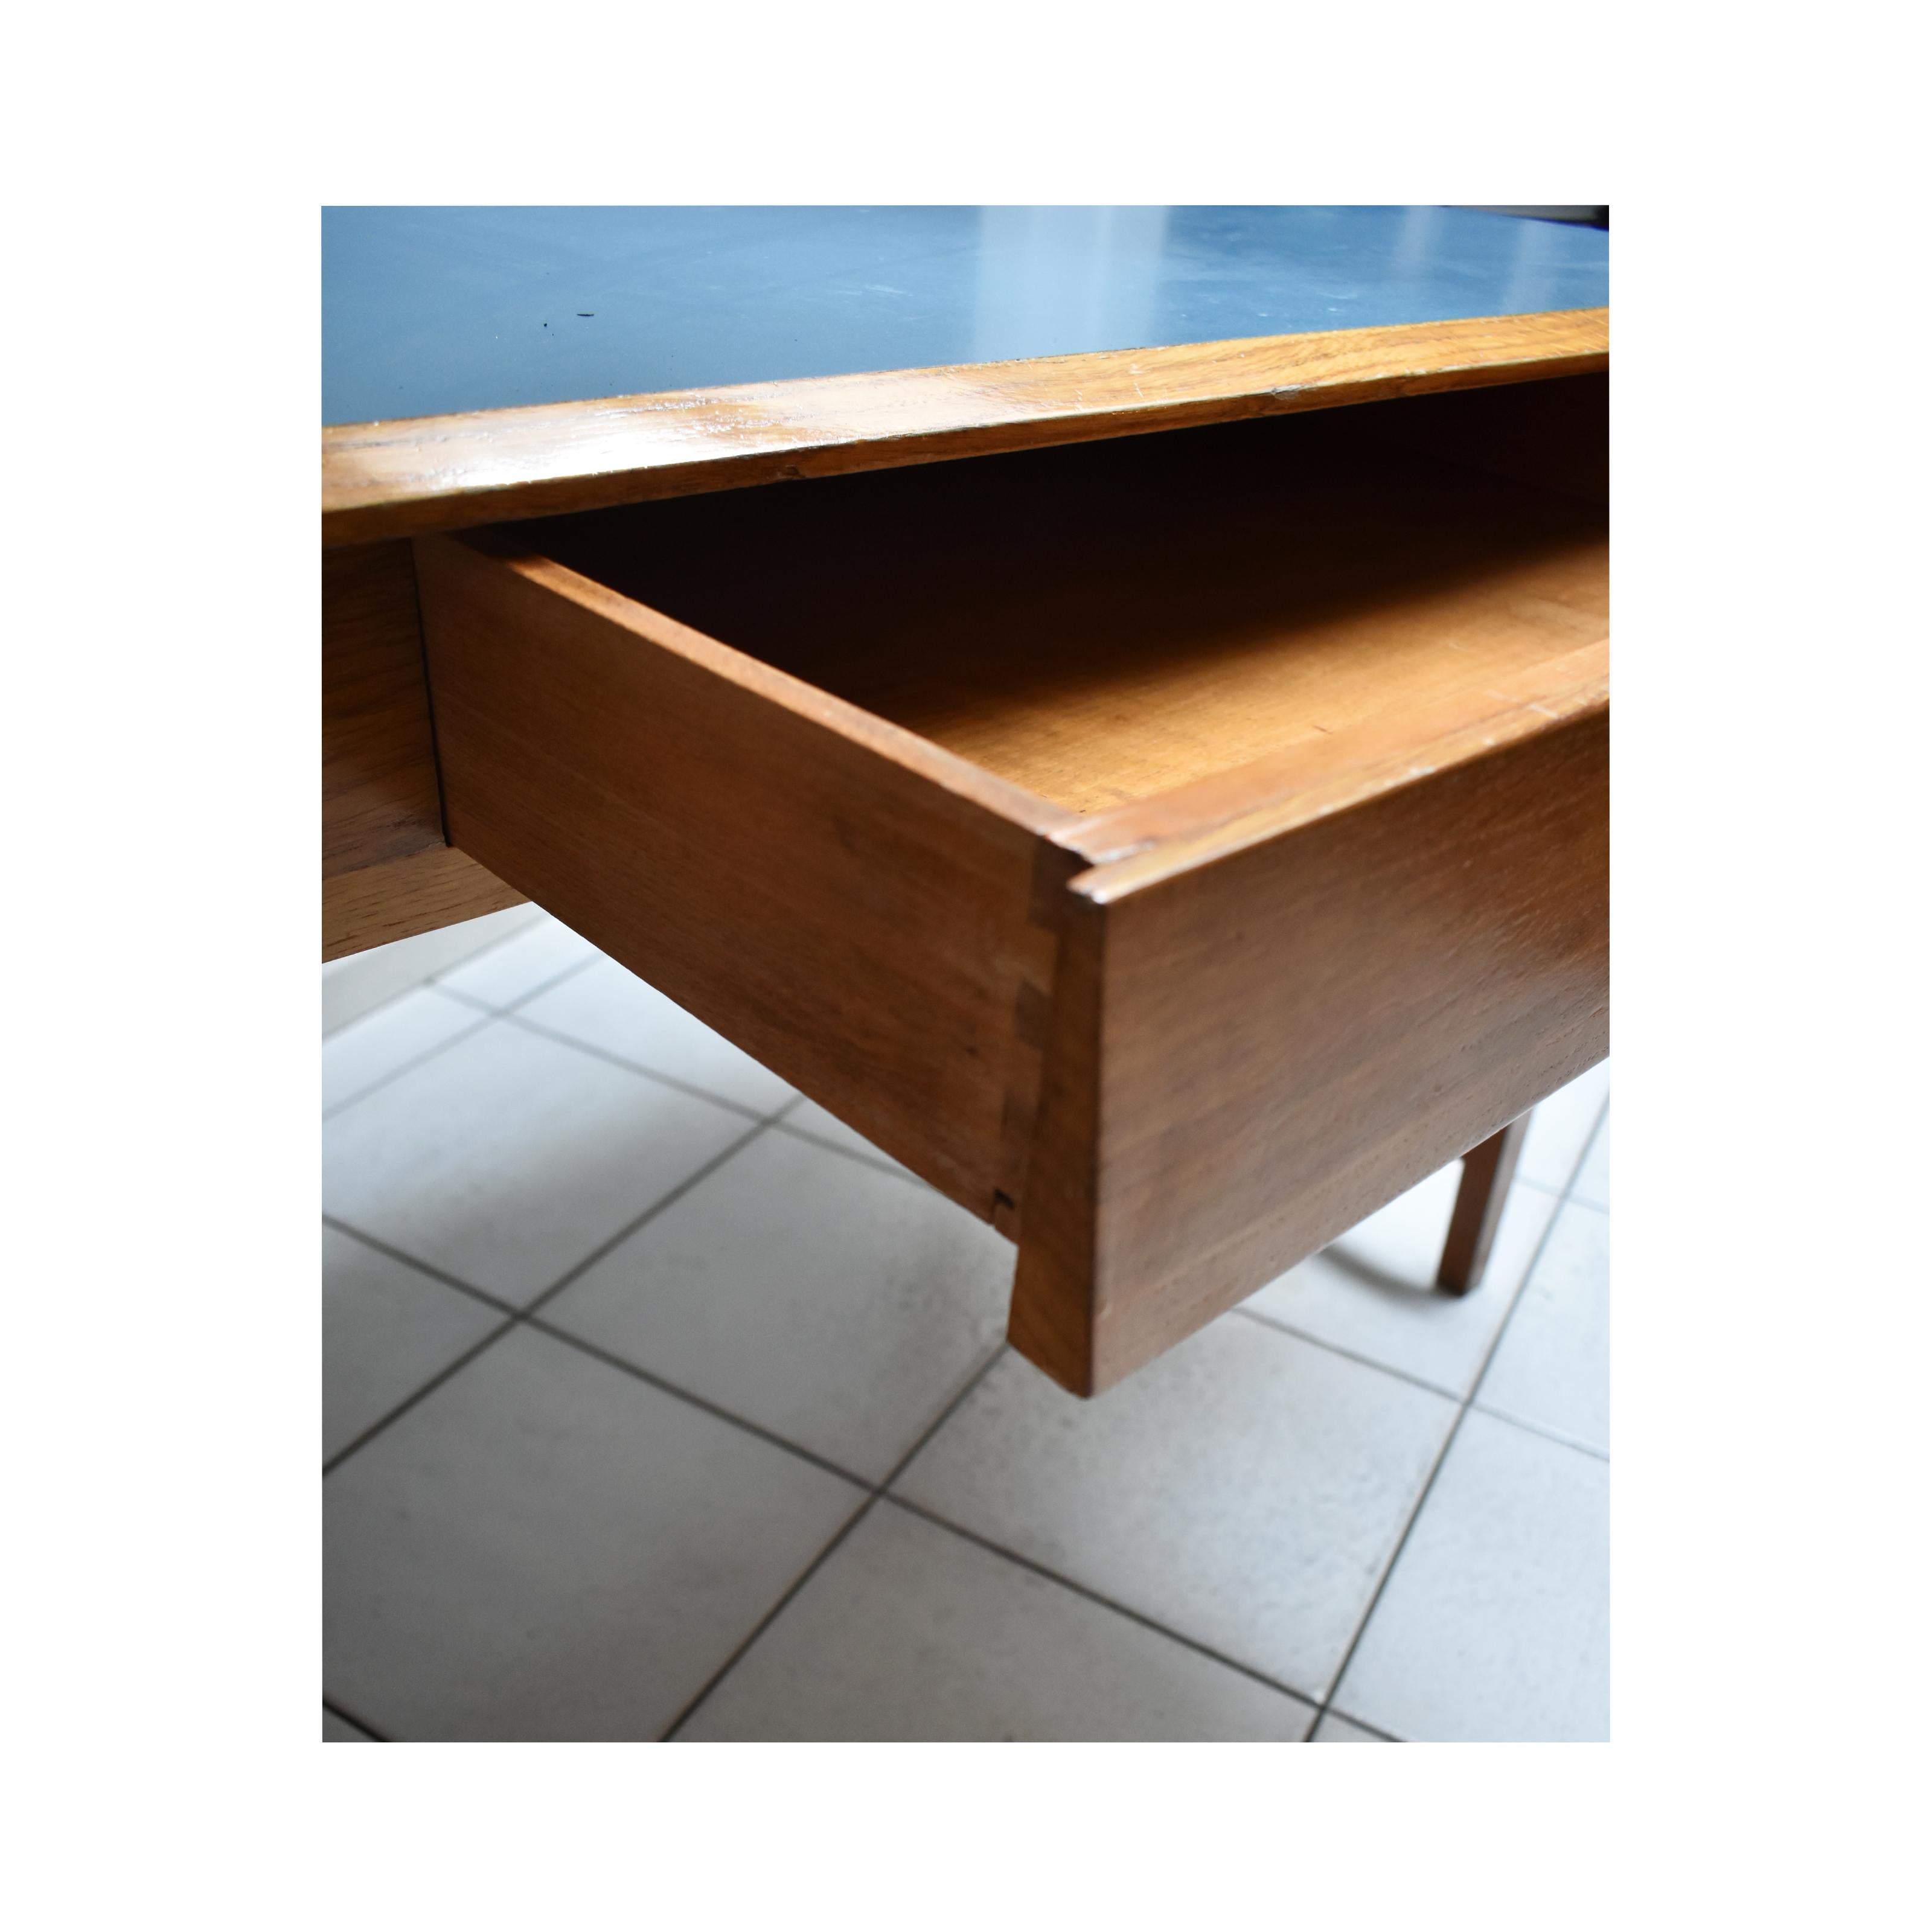  Italian Manufacture, 1960 writing desk in Wood and Light Blue Formica Top 4